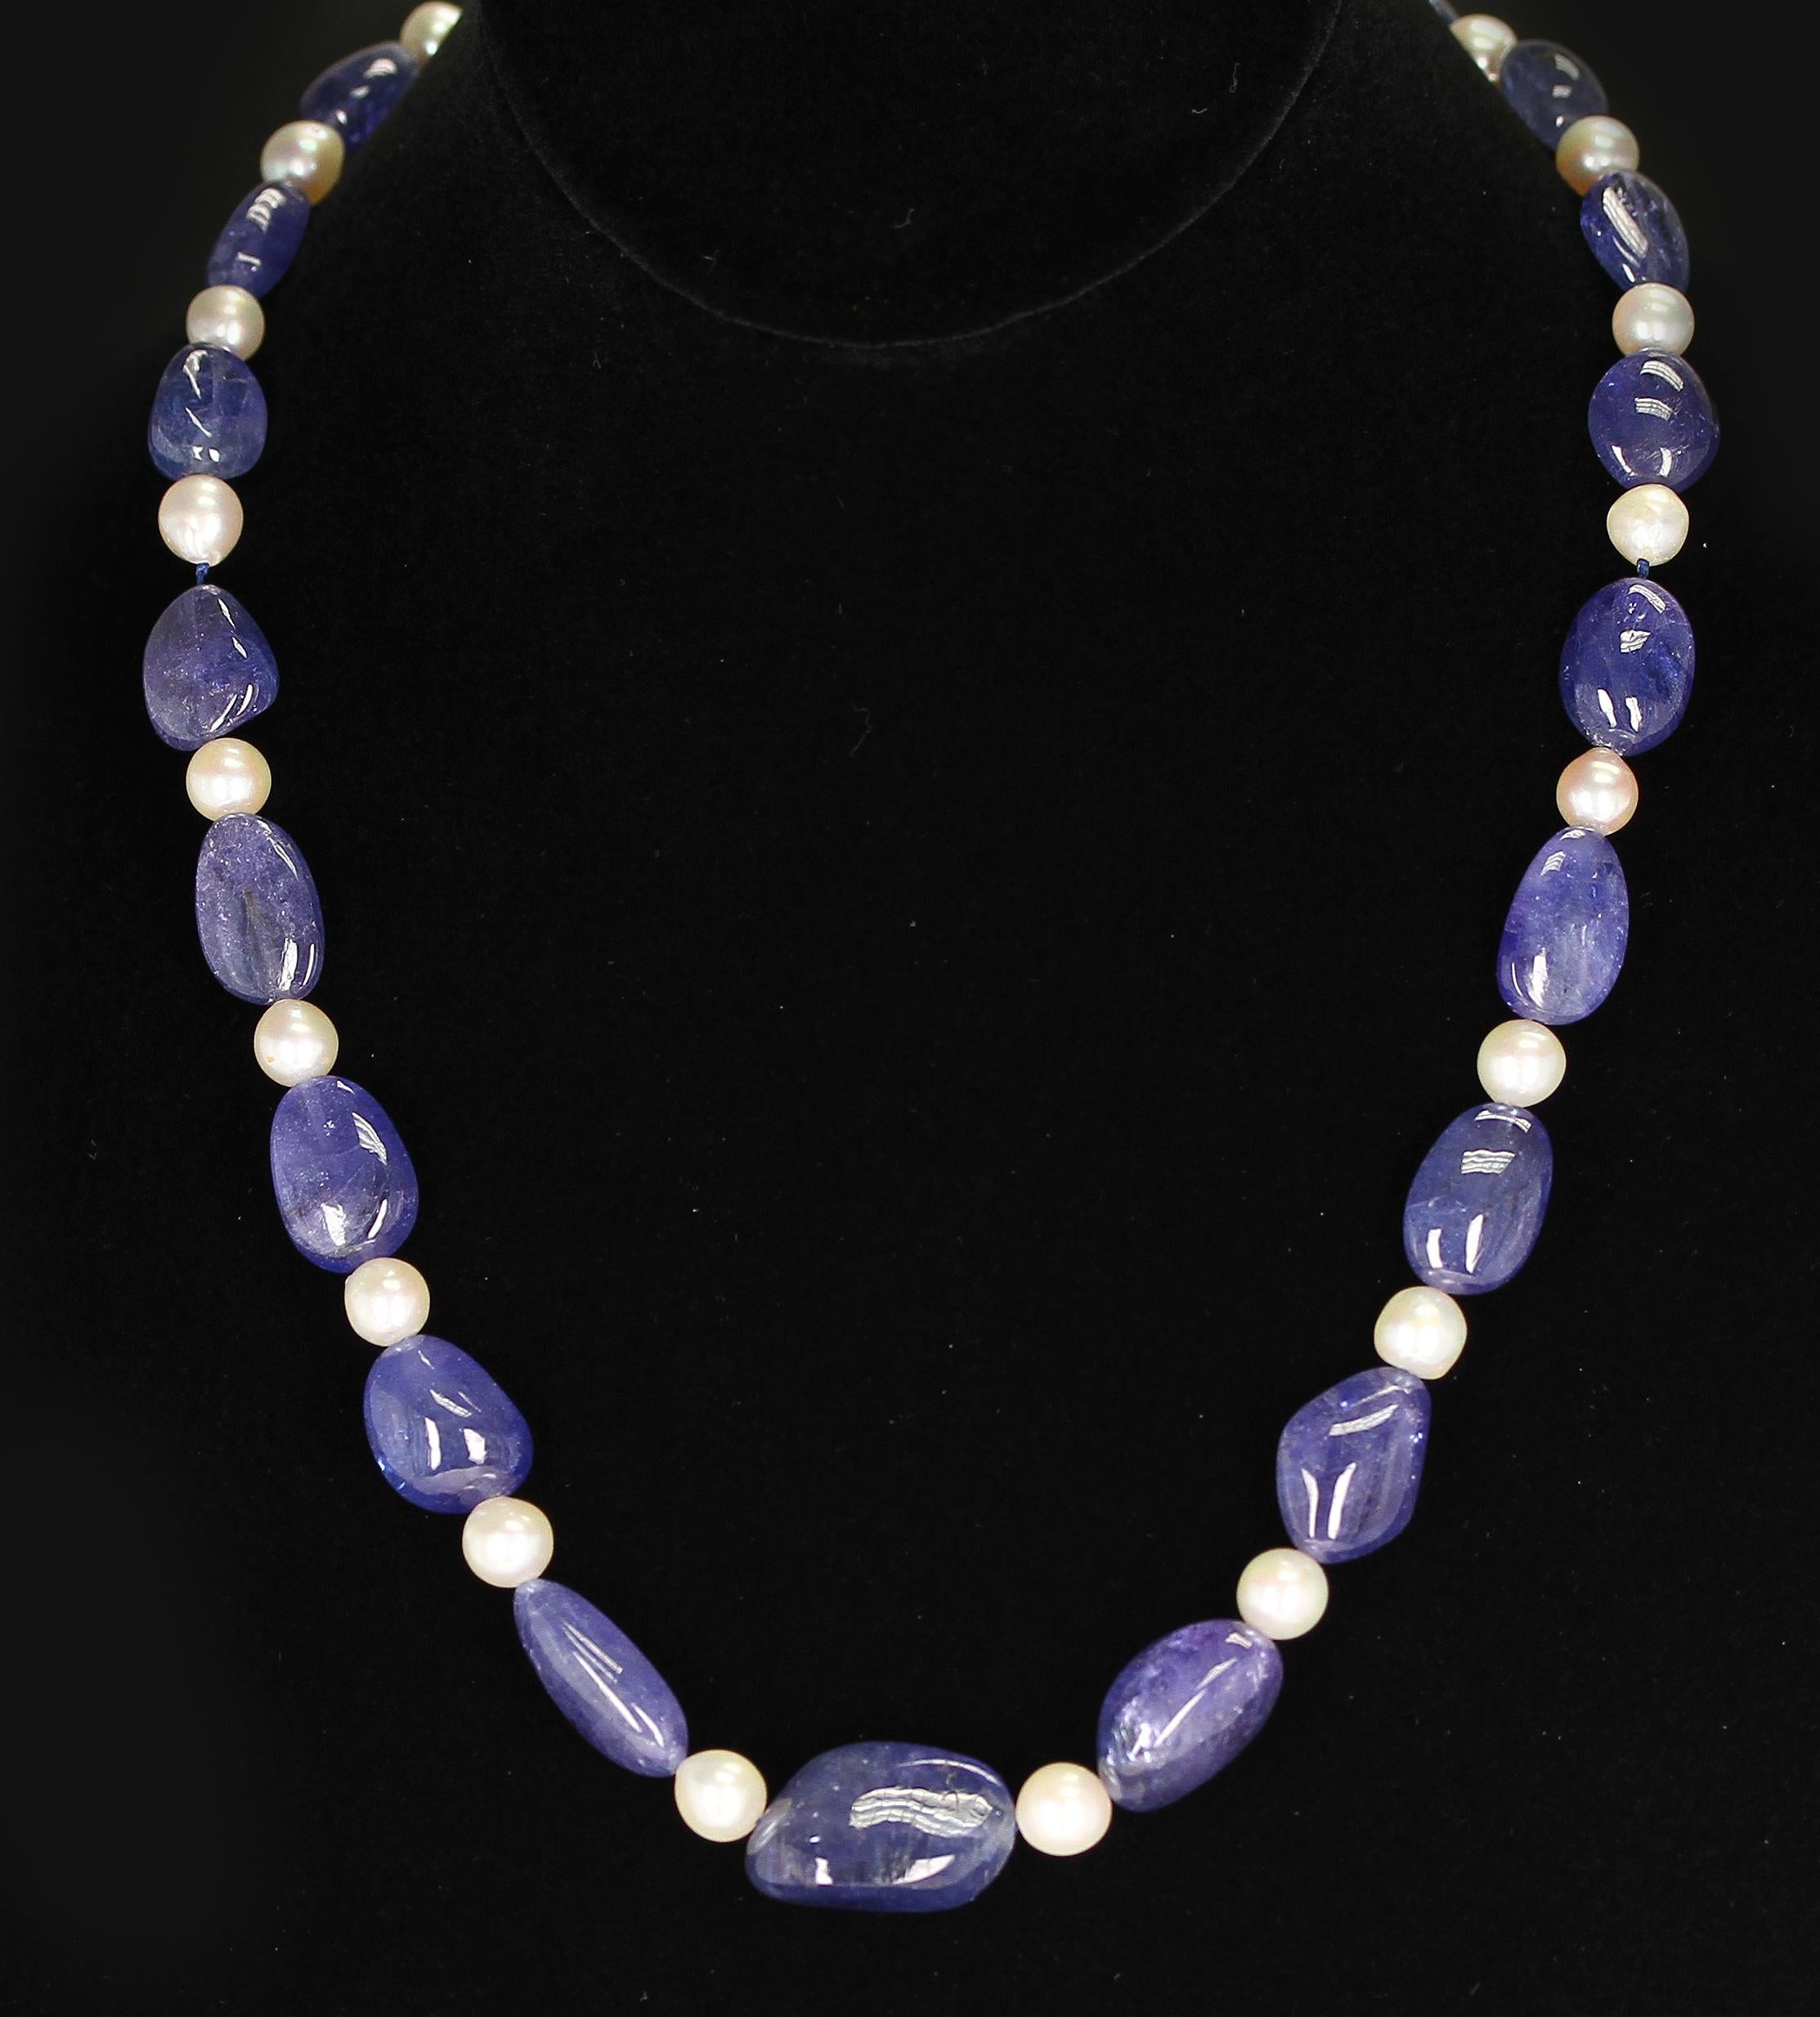 A fine strand of smooth Tanzanite Tumbled Beads & Pearls with a 14K Yellow Gold Clasp. Clasp can be changed according to preference. Weight: 340 cts., Length: 20 inches.